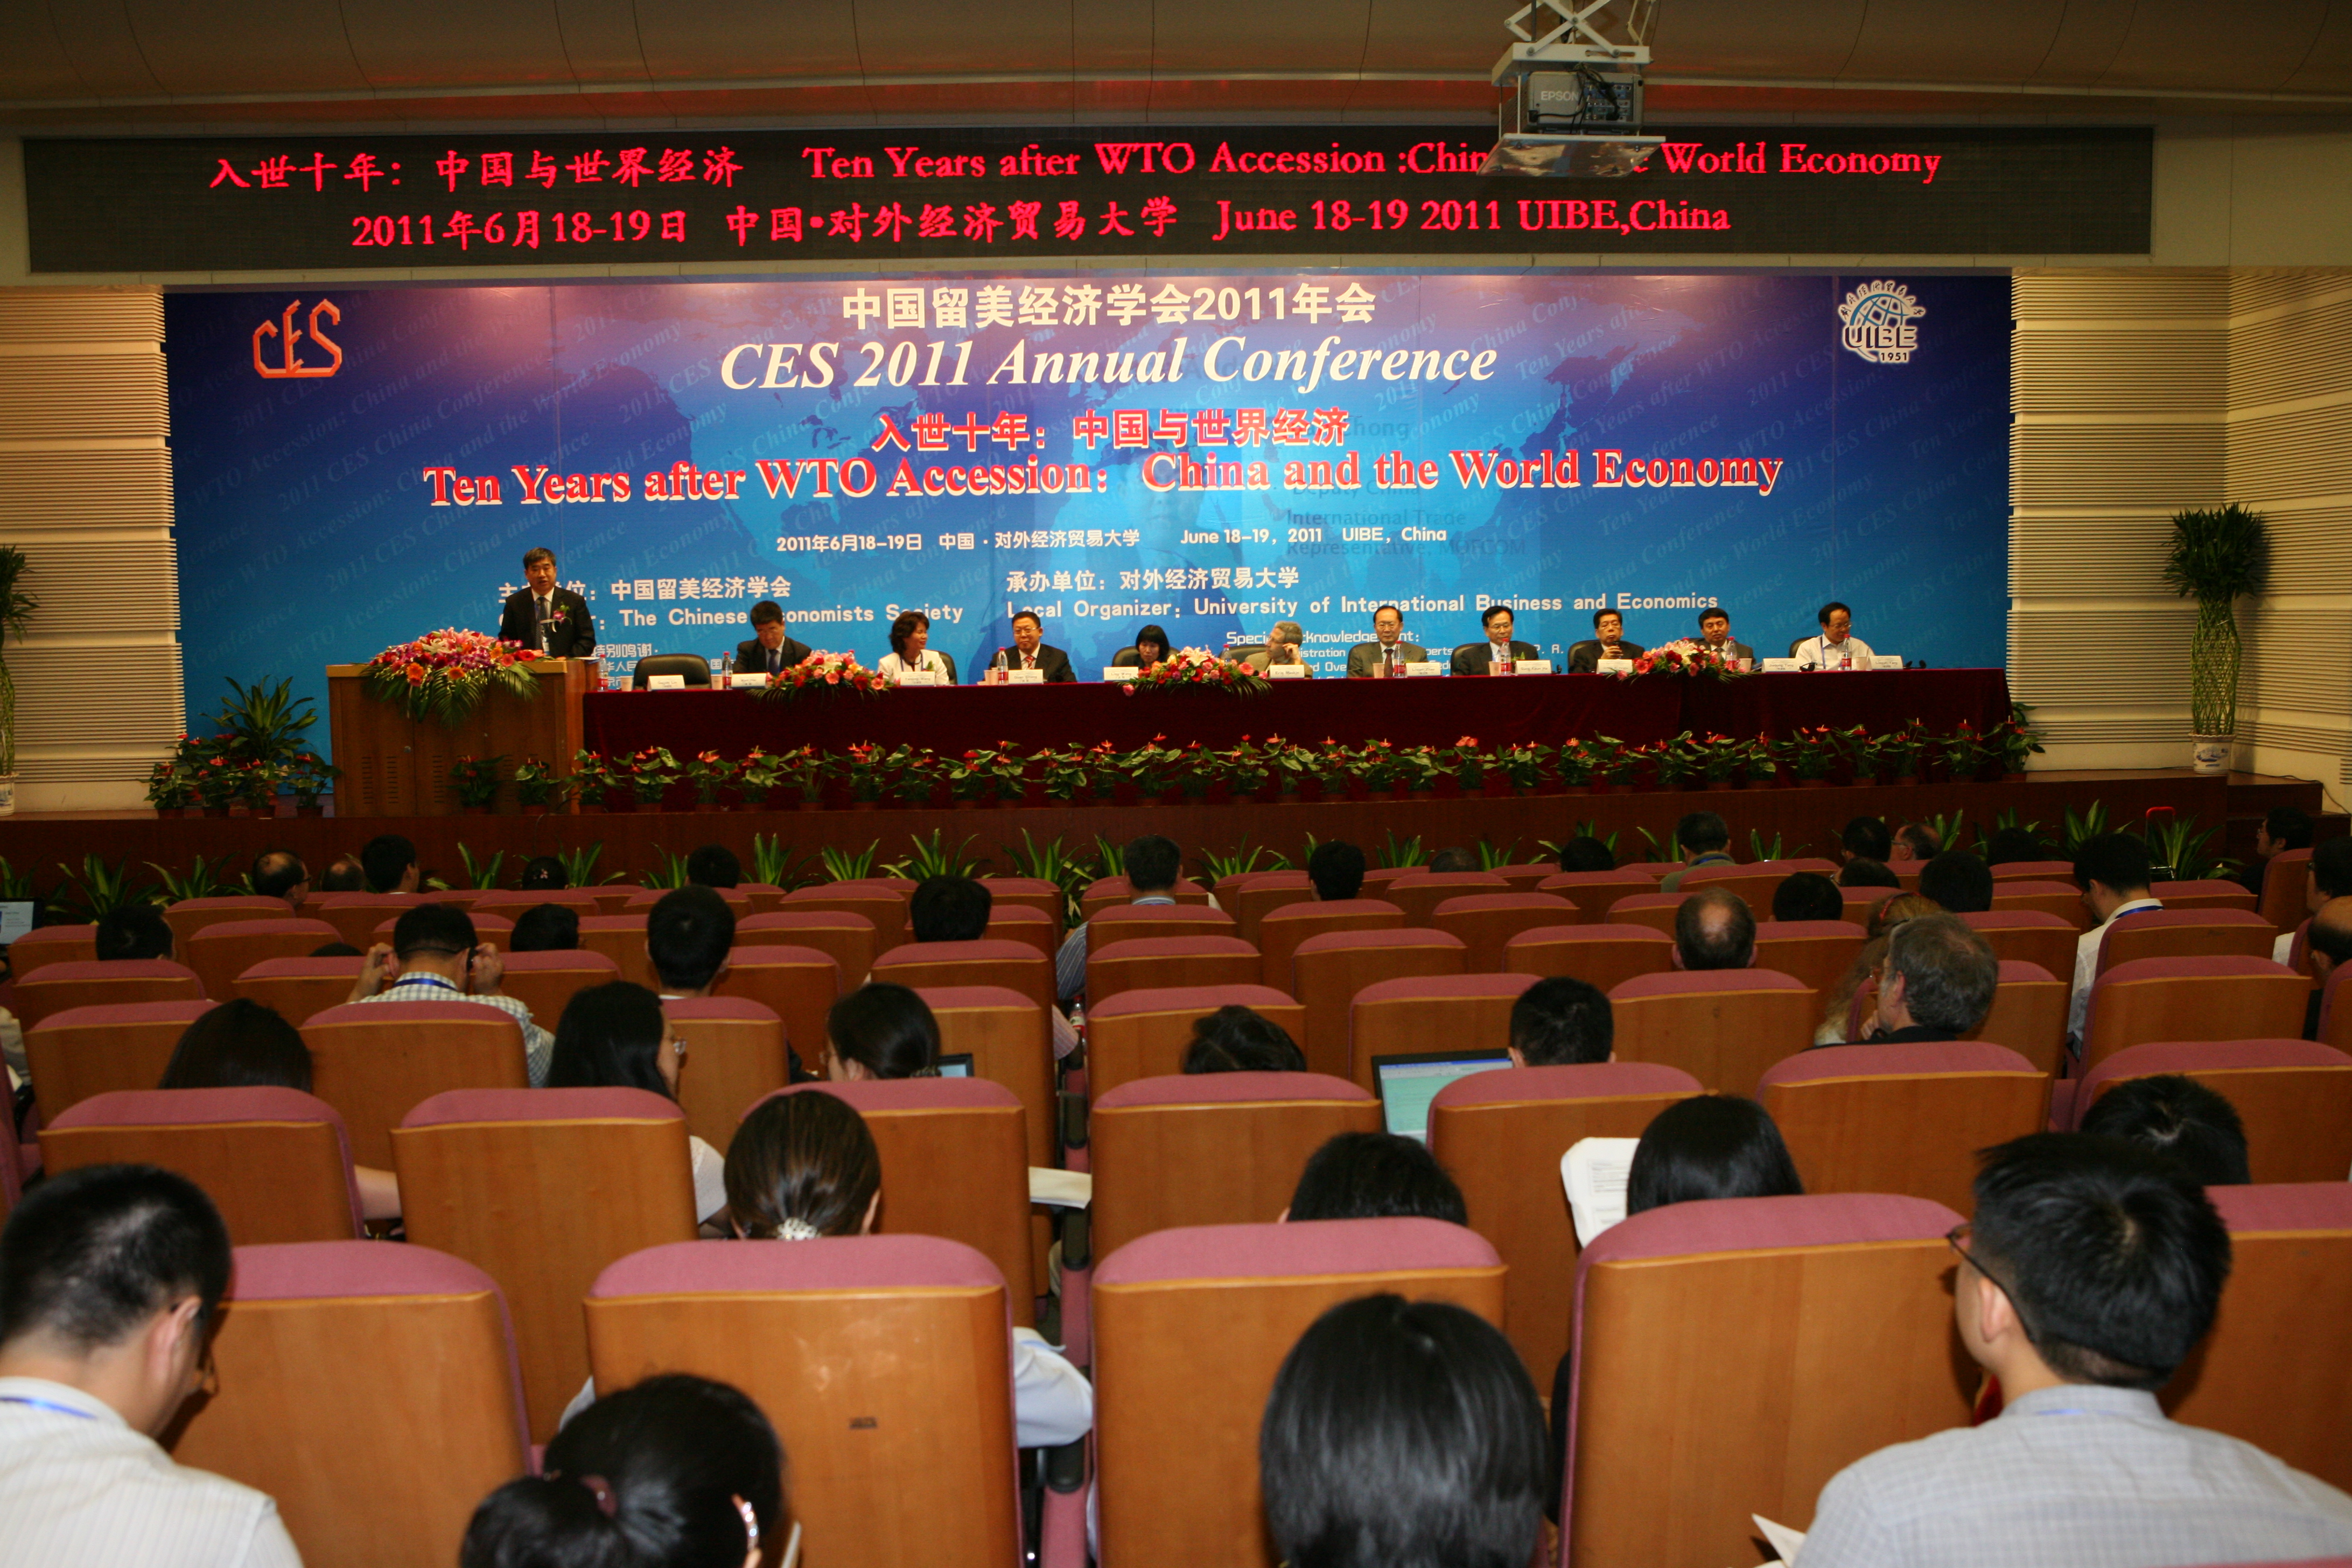 Conference Opening Session